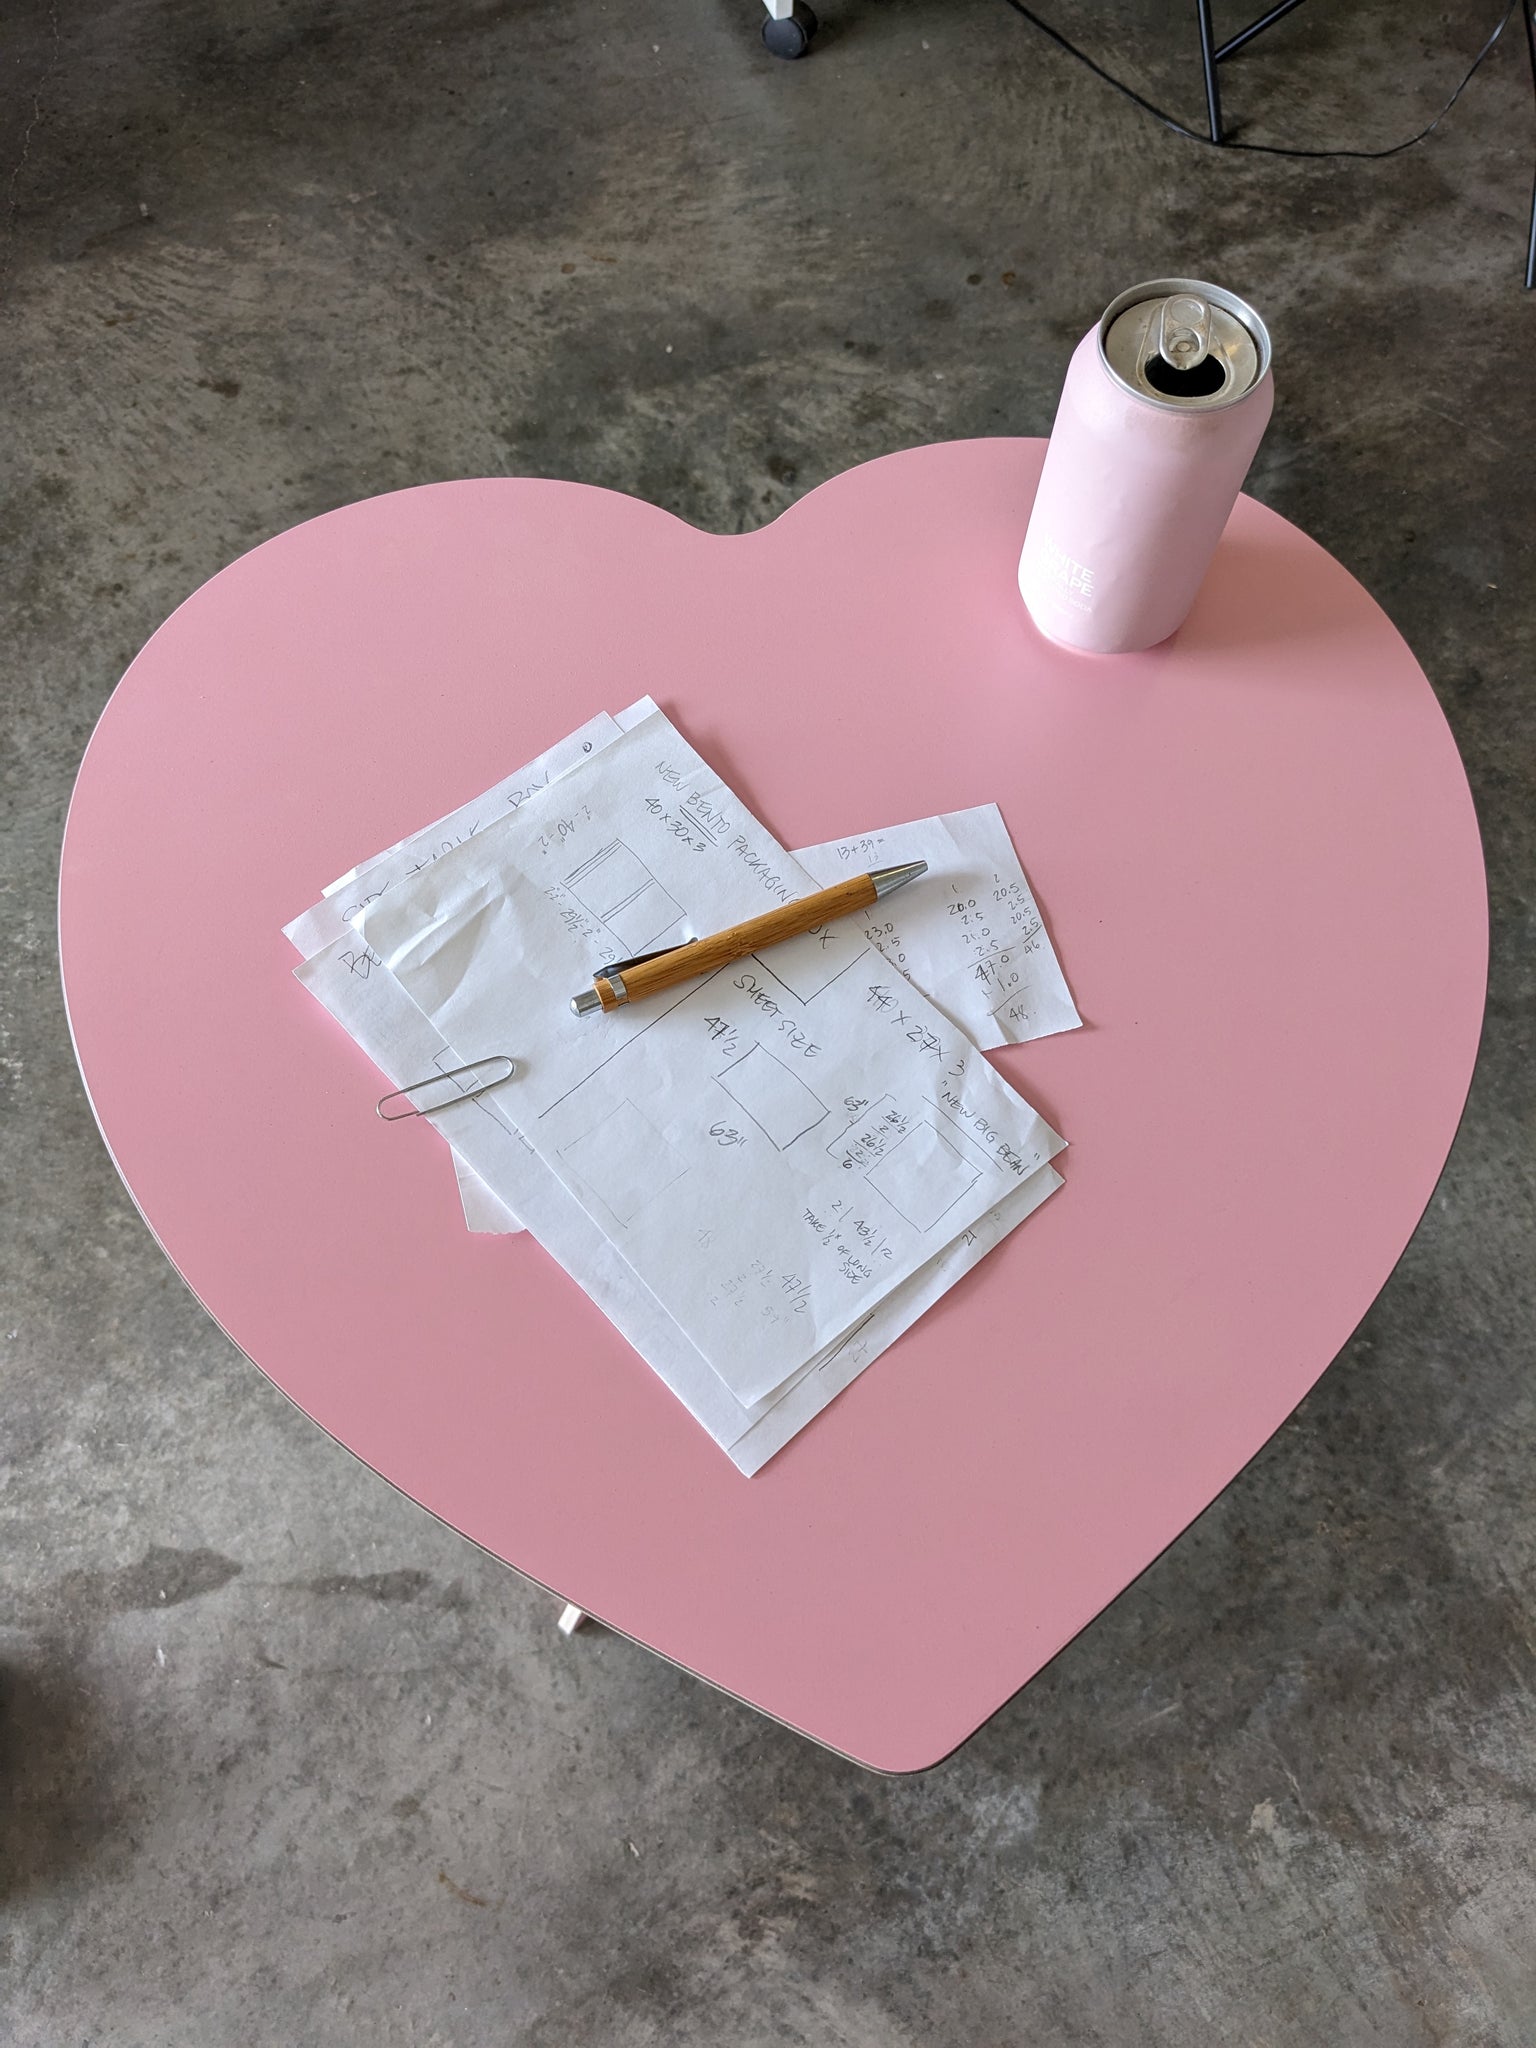 Lilly Updesk w/Heart